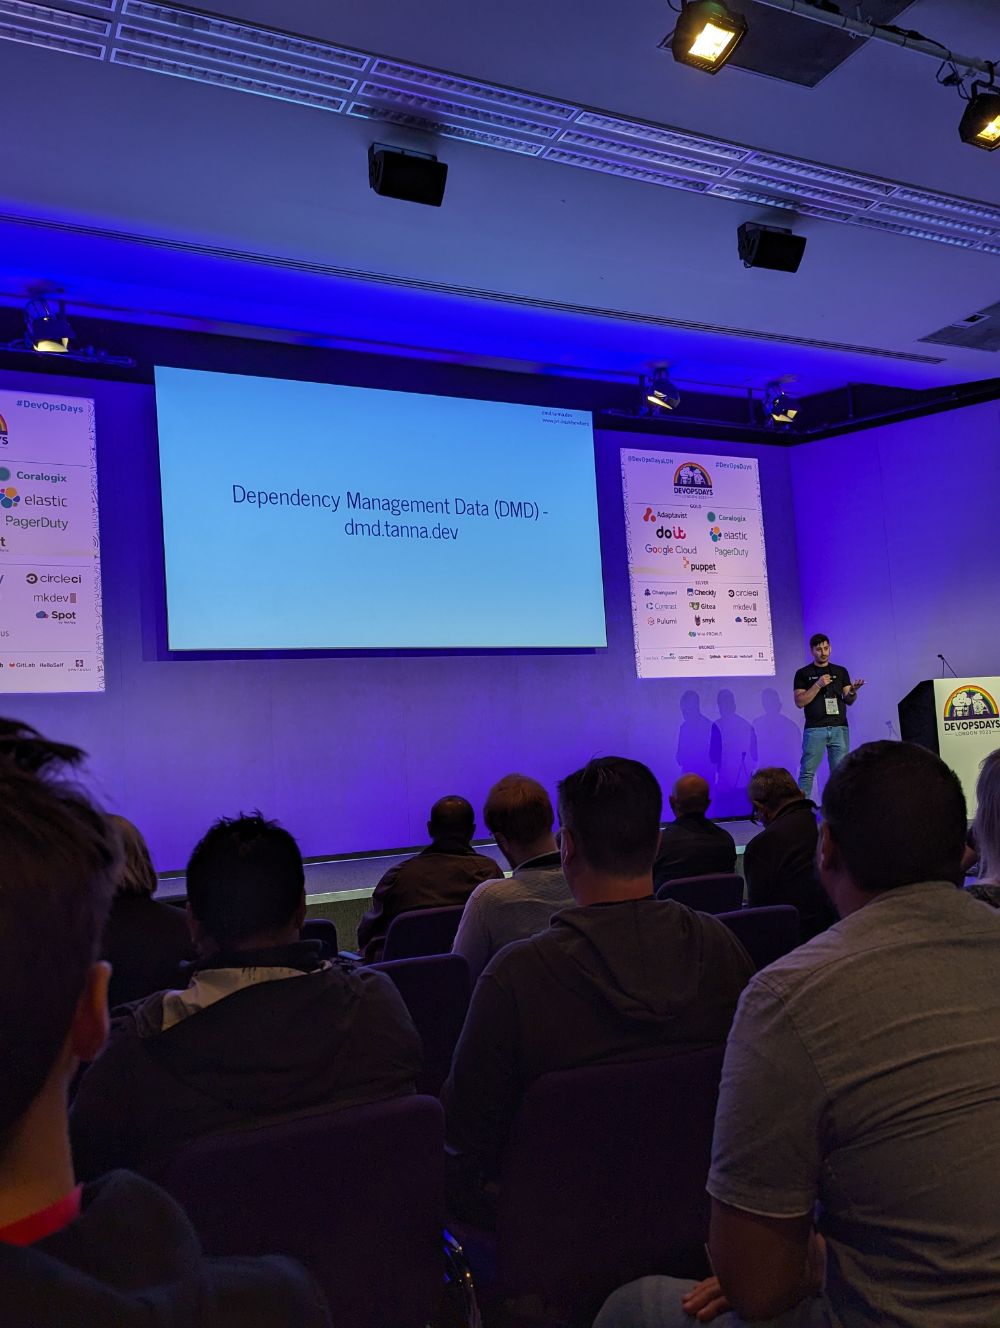 Jamie speaking on stage at DevOpsDays London, in front of a slide about the creation of the Open Source project dependency-management-data (dmd.tanna.dev)